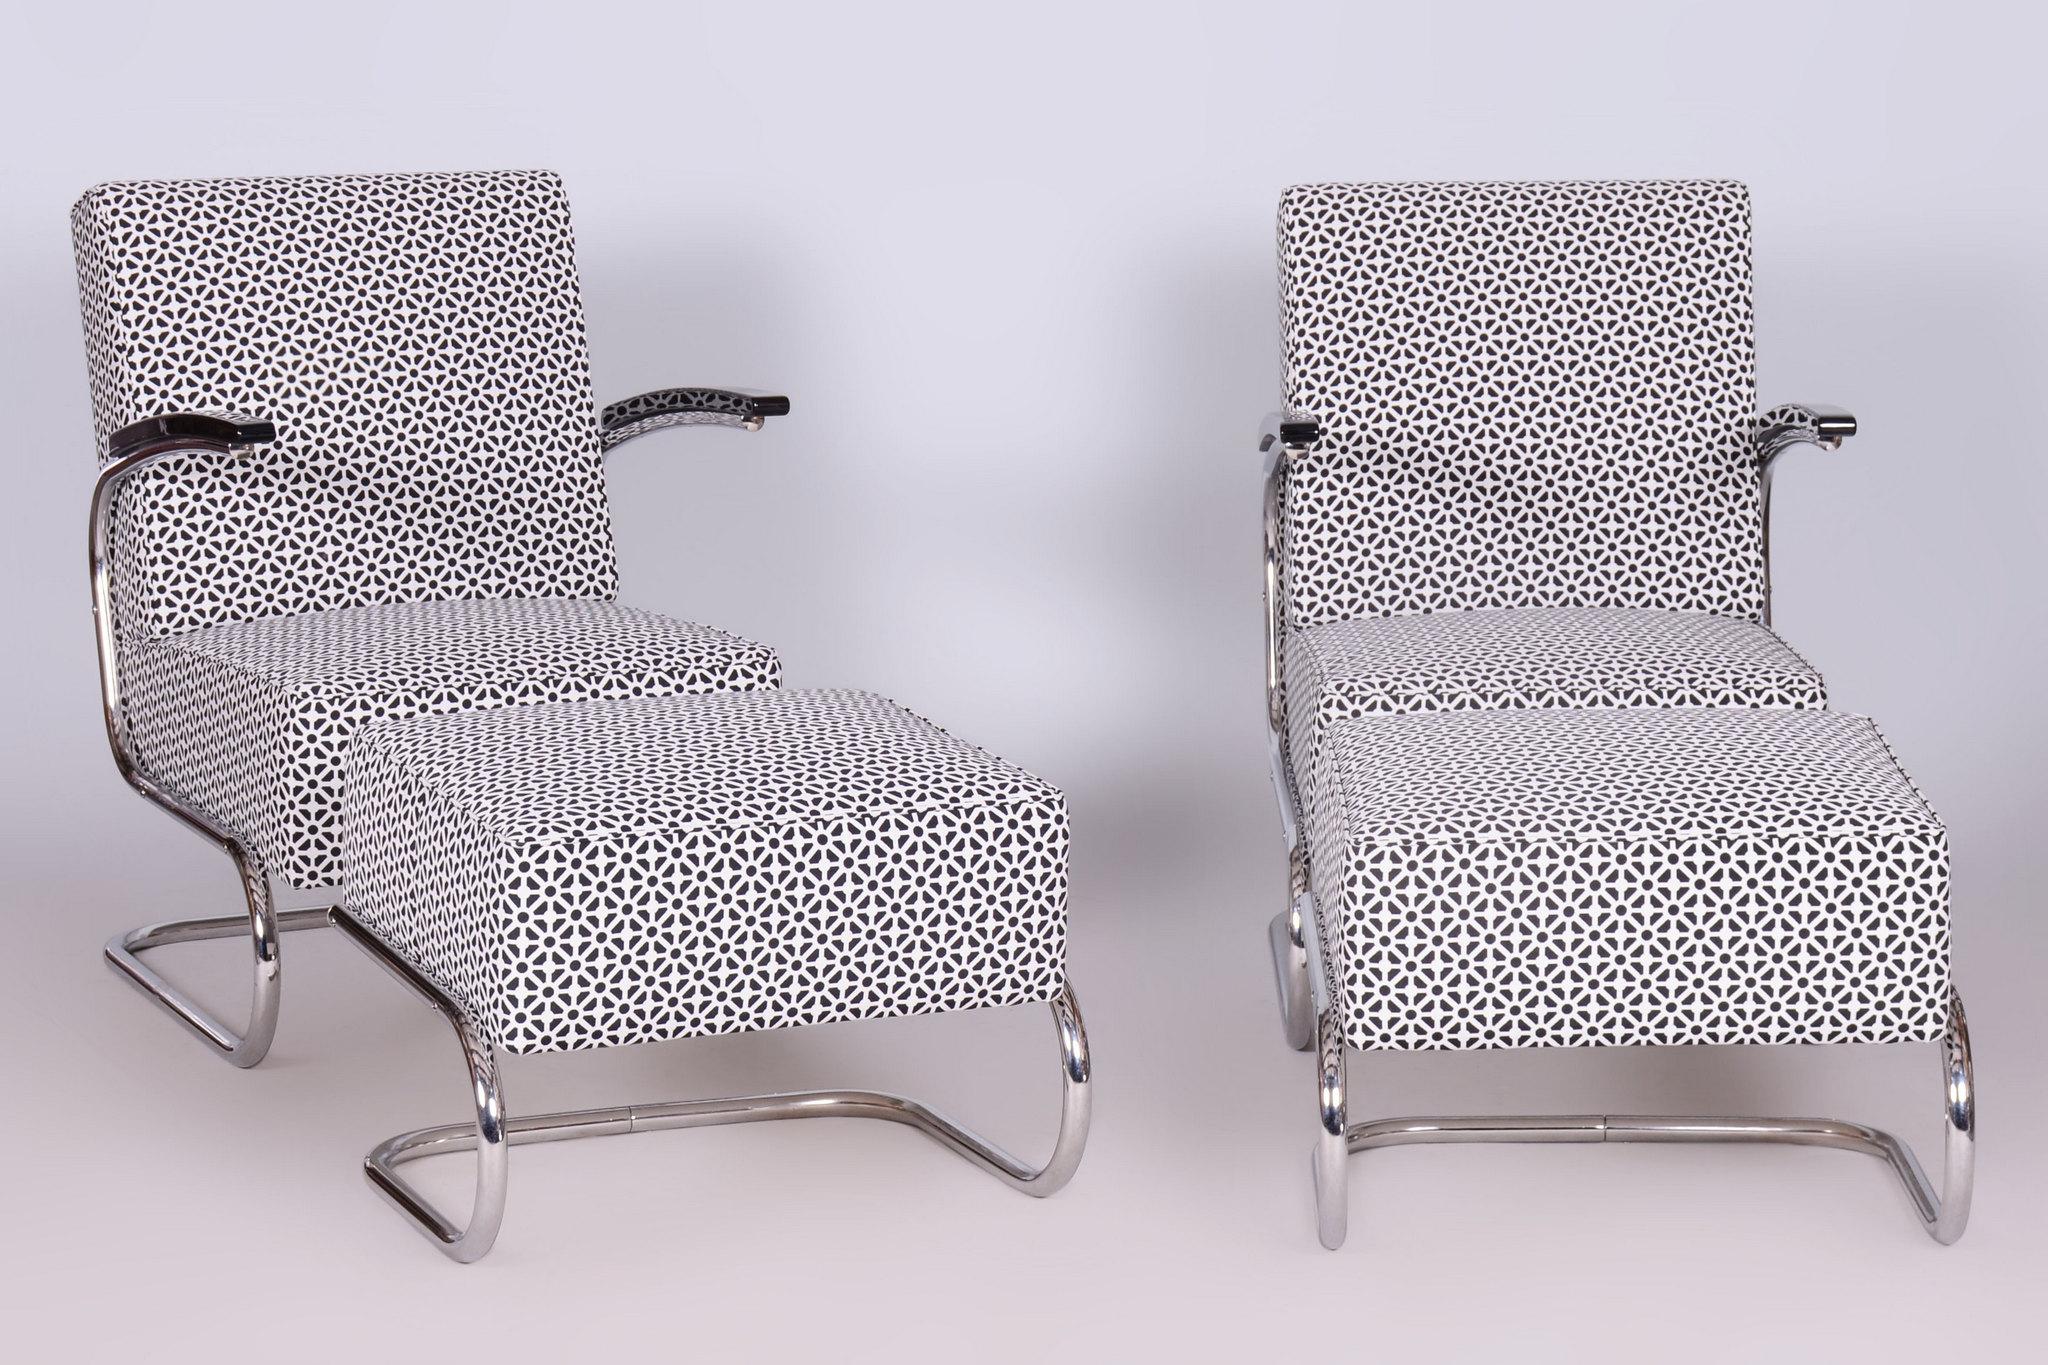 Set of two armchairs and two stools

Armchair dimensions:
Height: 83 cm (32.7 in)
Width: 58 cm (22.8 in)
Depth: 74 cm (29.1 in)
Seat height: 41 cm (16.1 in)

Stool dimensions:
Height: 42 cm (16.5 in)
Width: 57 cm (22.4 in)
Depth: 48 cm (18.9